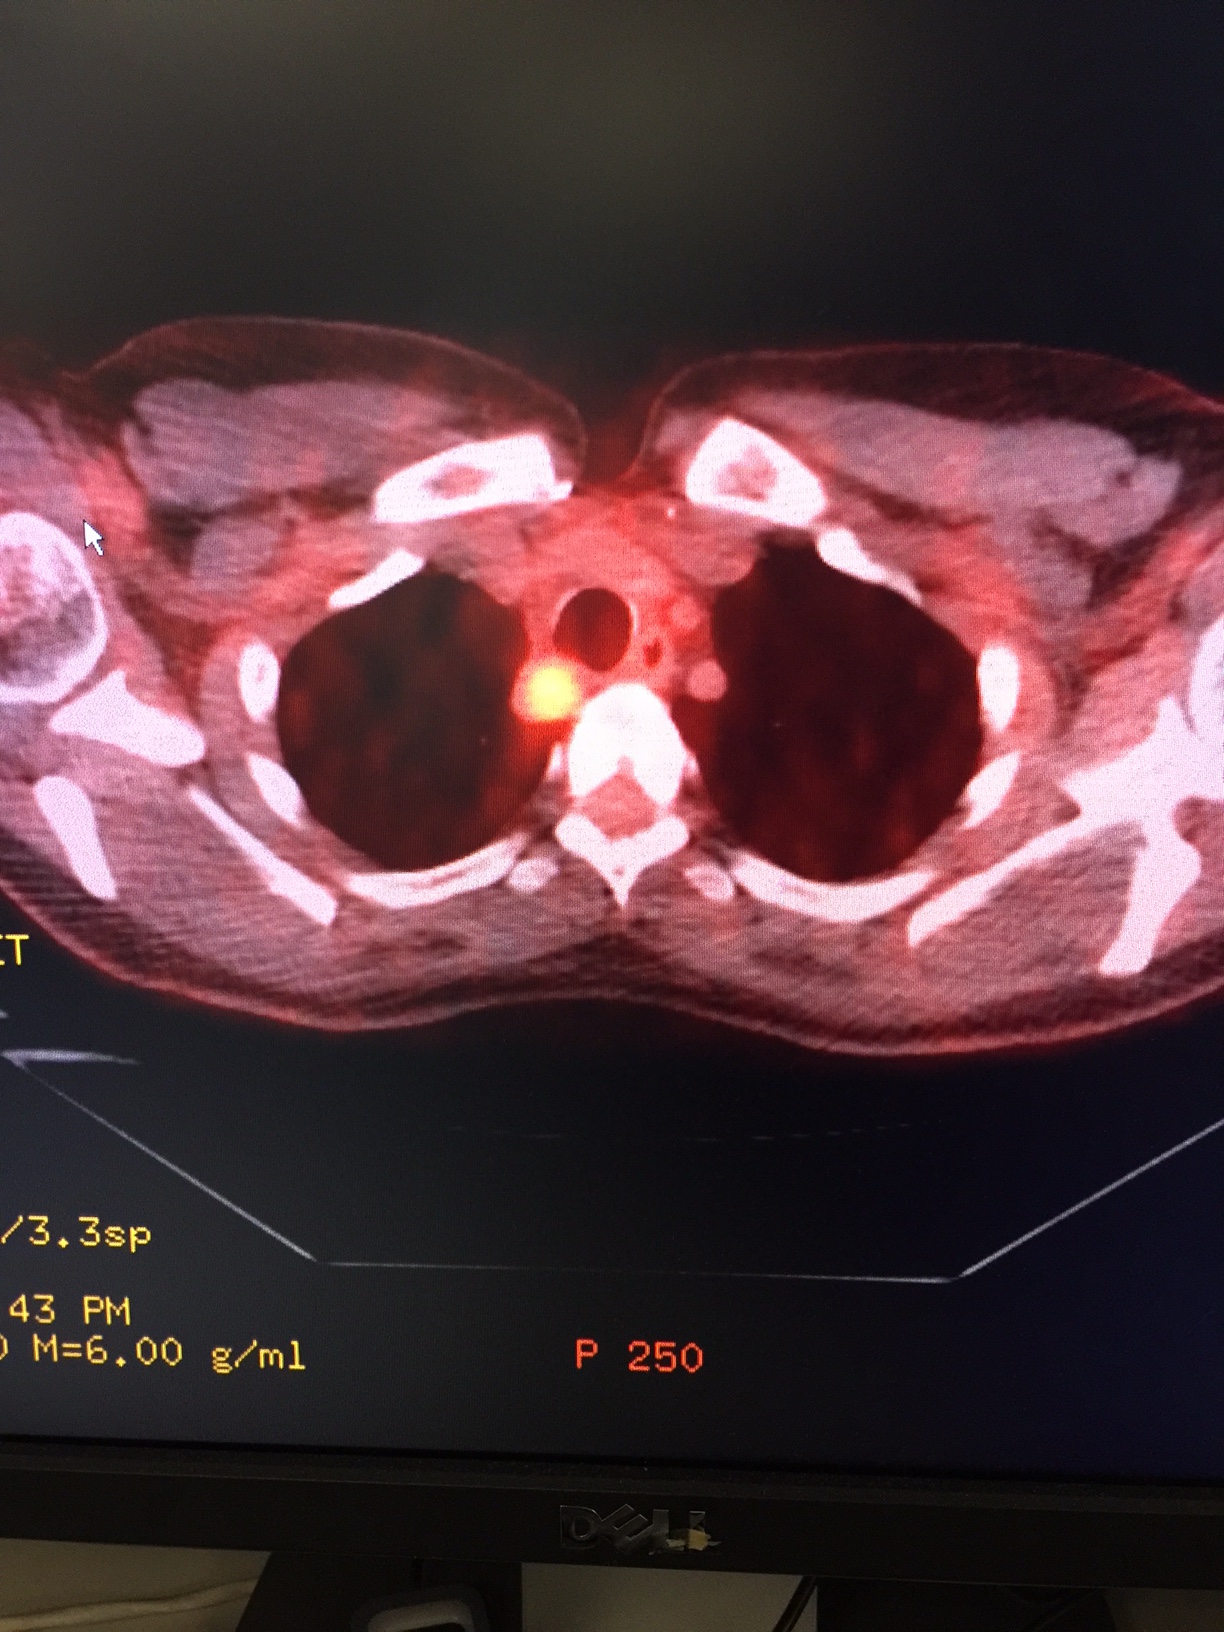 PET/CT scan of a patient with recurrent papillary thyroid cancer